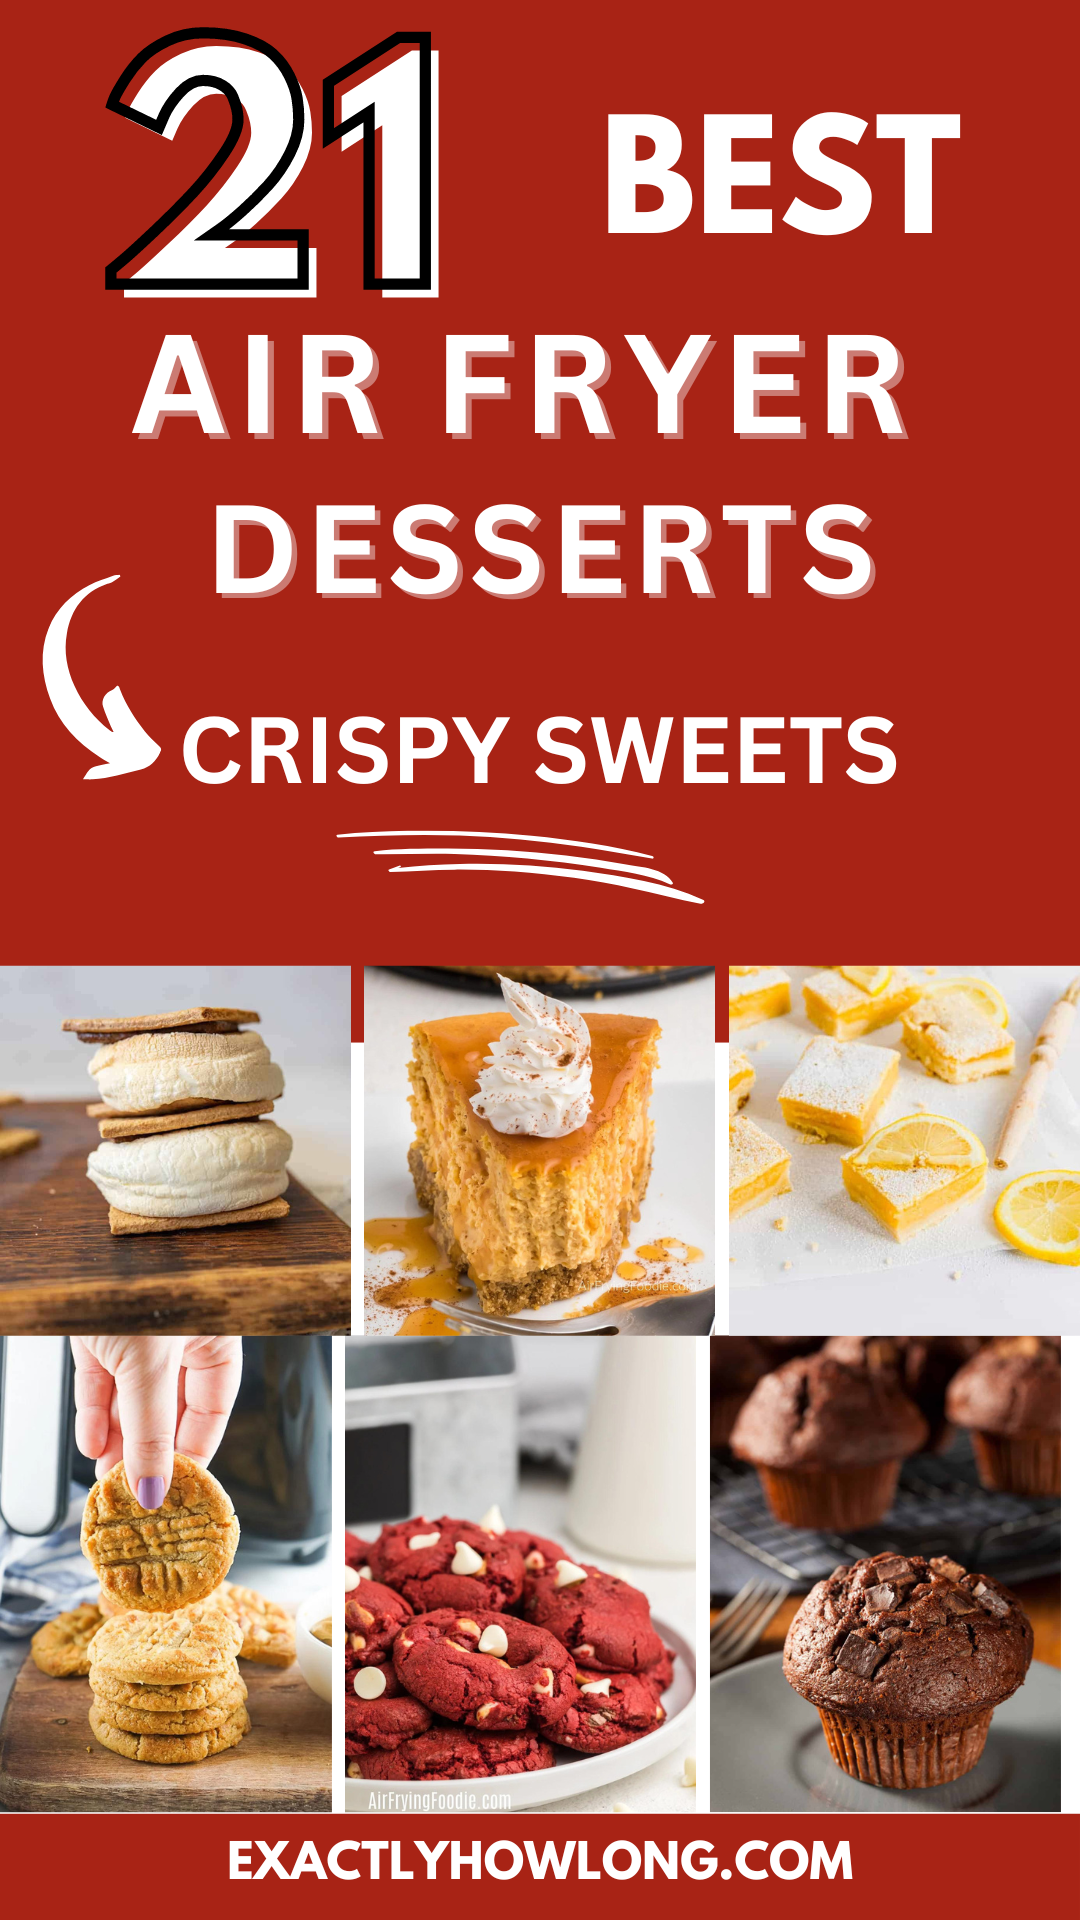 Simple air fryer dessert recipes for novices - air fryer dessert recipes suitable for Weight Watchers